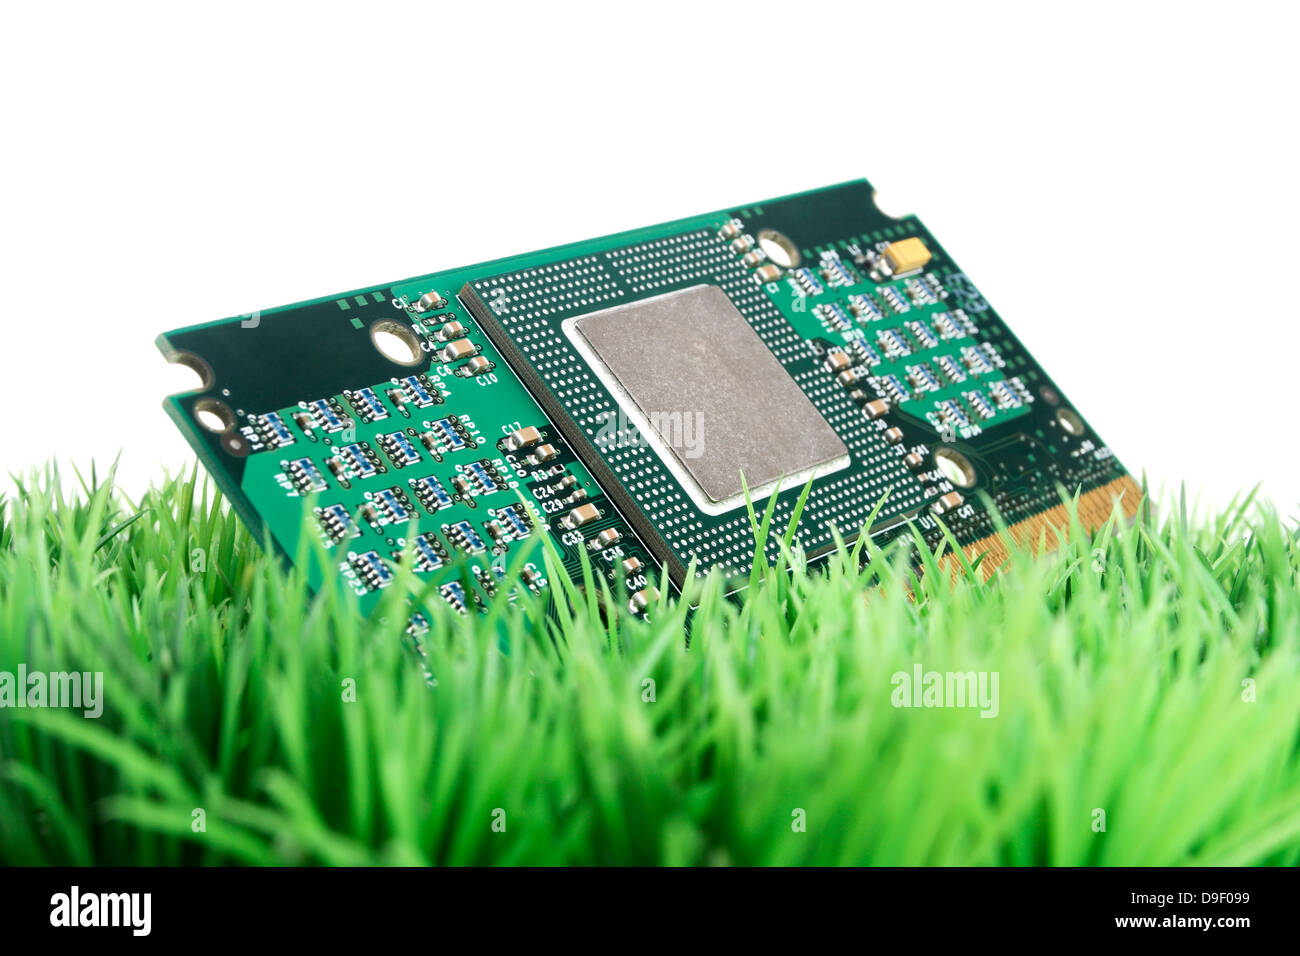 To platinum with processor base on art lawn Board with processor socket on synthetic Grass Stock Photo